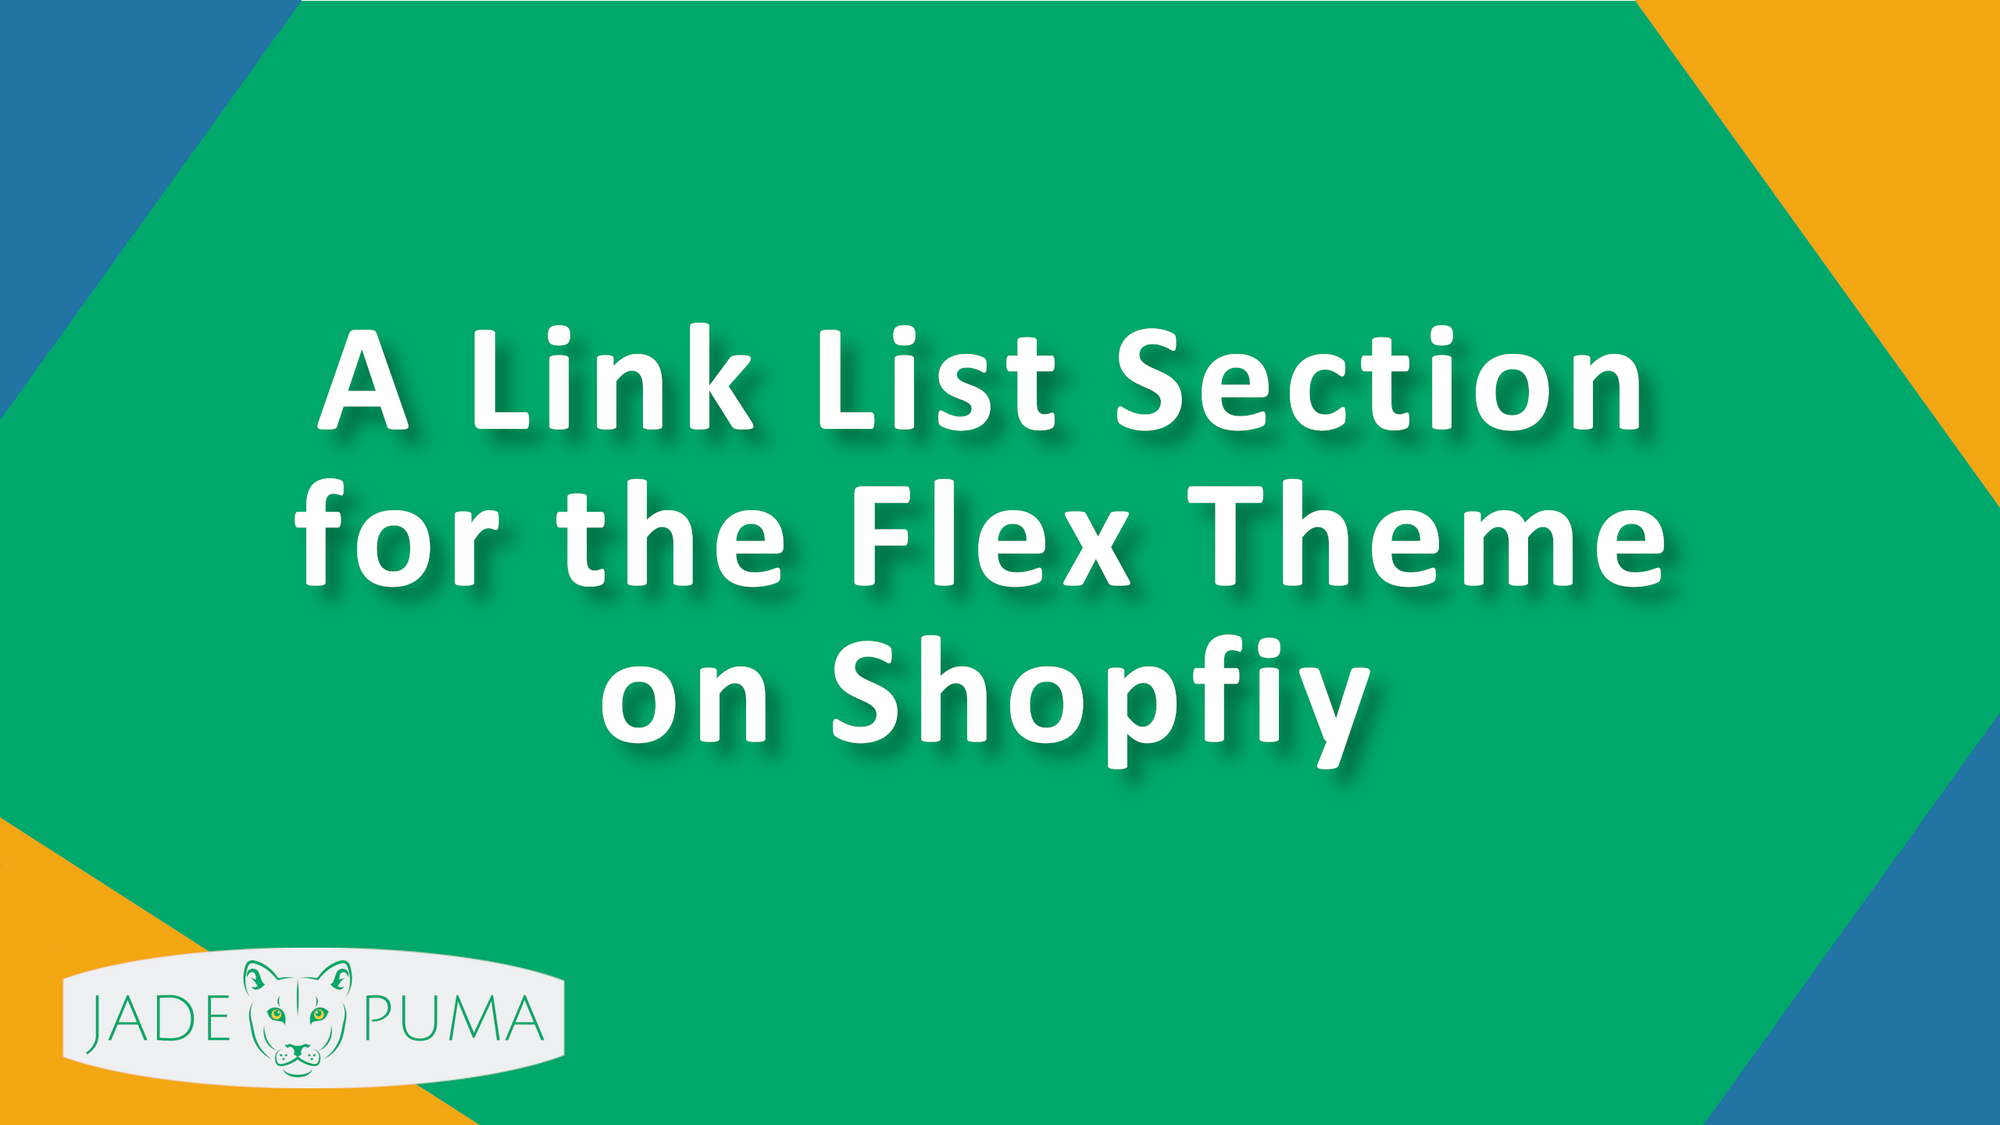 A Link List Section for the Flex Theme on Shopify